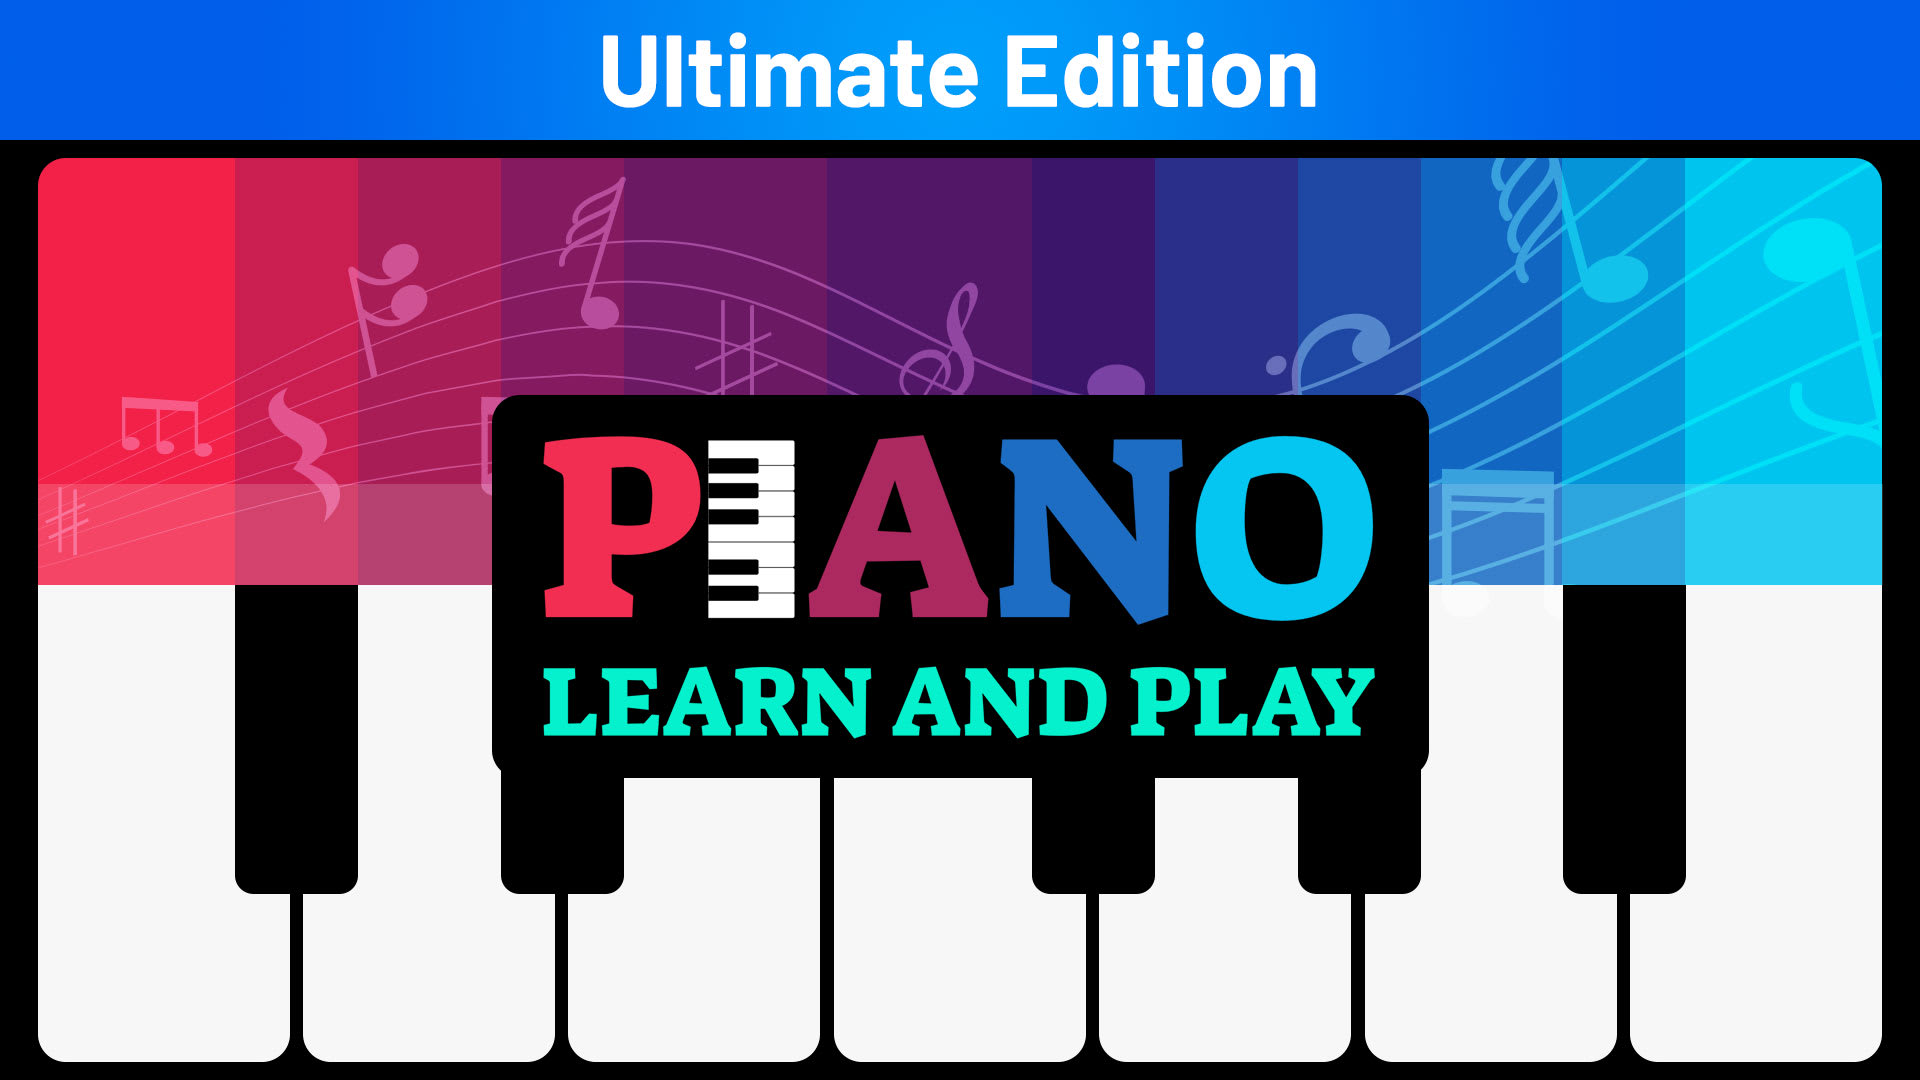 Piano: Learn and Play Ultimate Edition